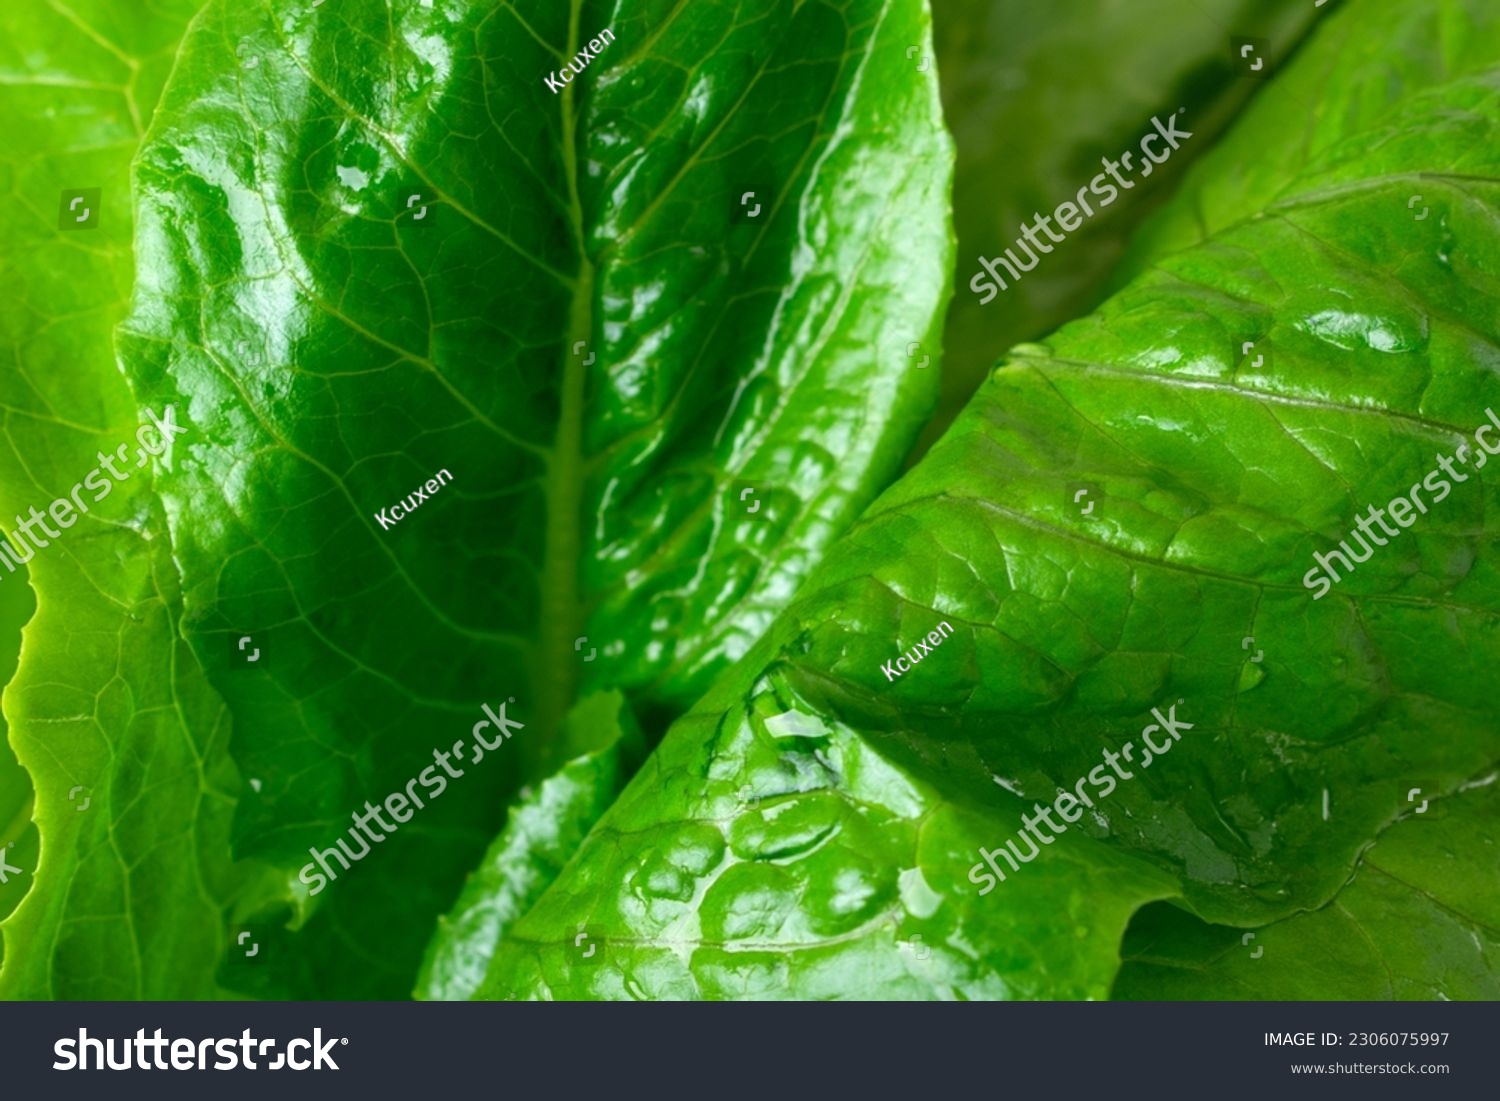 Romaine lettuce leaves in close-up view. Full frame. Vegetable and healthy eating background #2306075997